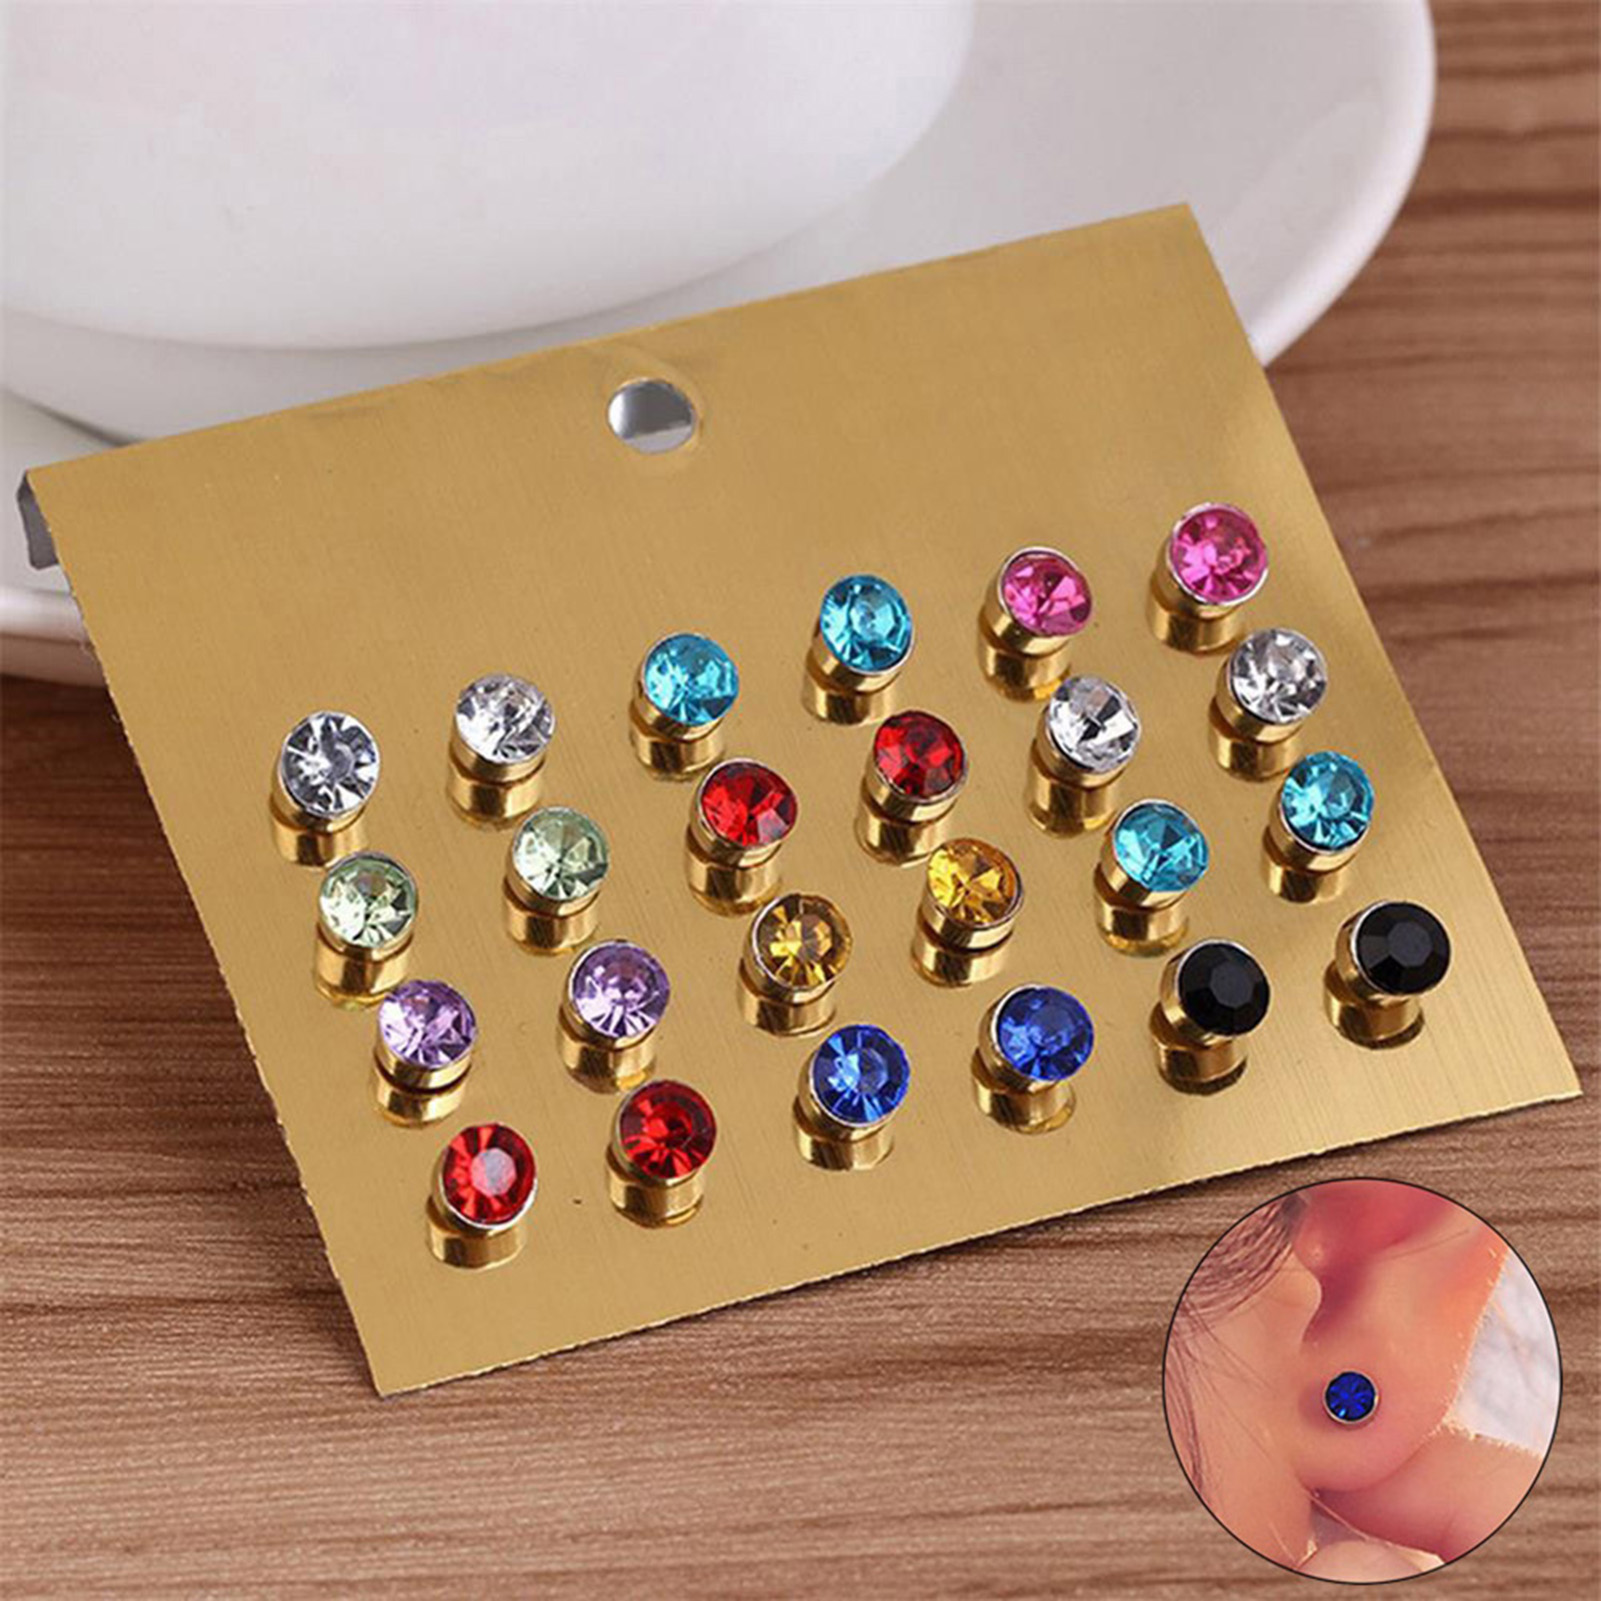 Naierhg 12Pcs/Set Earrings Nickel-free with Rhinestone Alloy Women Earring Jewelry for Birthday - image 3 of 7